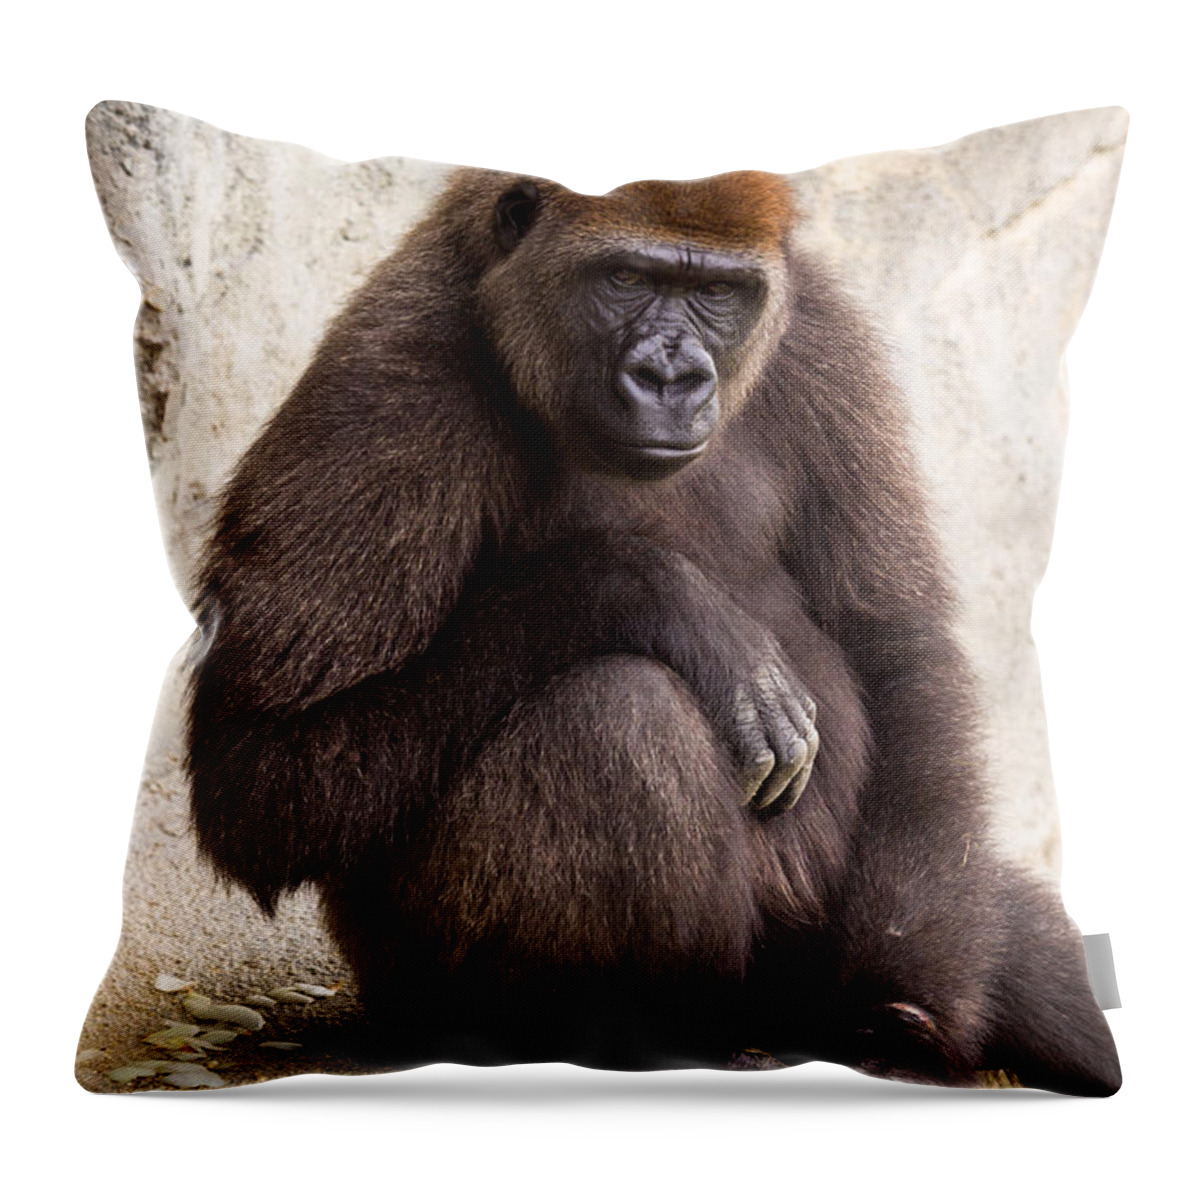 Africa Throw Pillow featuring the photograph Pensive Gorilla by Raul Rodriguez